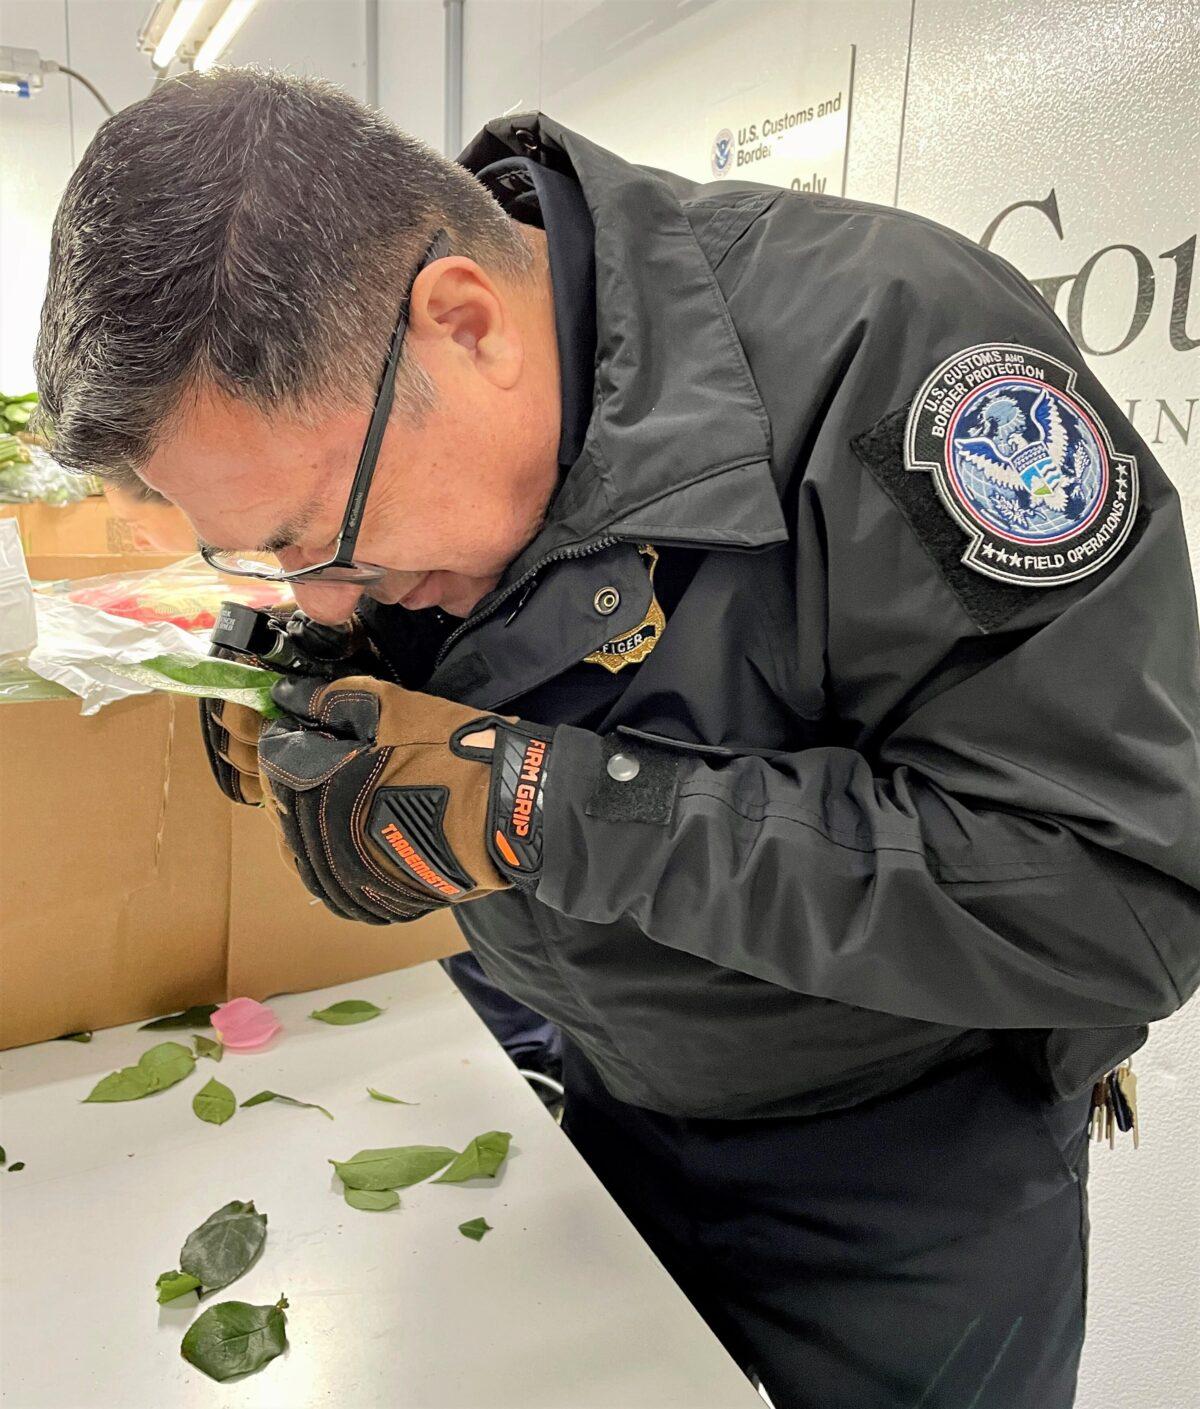 A U. S. Customs and Border Protection agriculture specialist at Los Angeles International Airport inspects imported Mother’s Day cut flowers. (Courtesy of U. S. Customs and Border Protection)